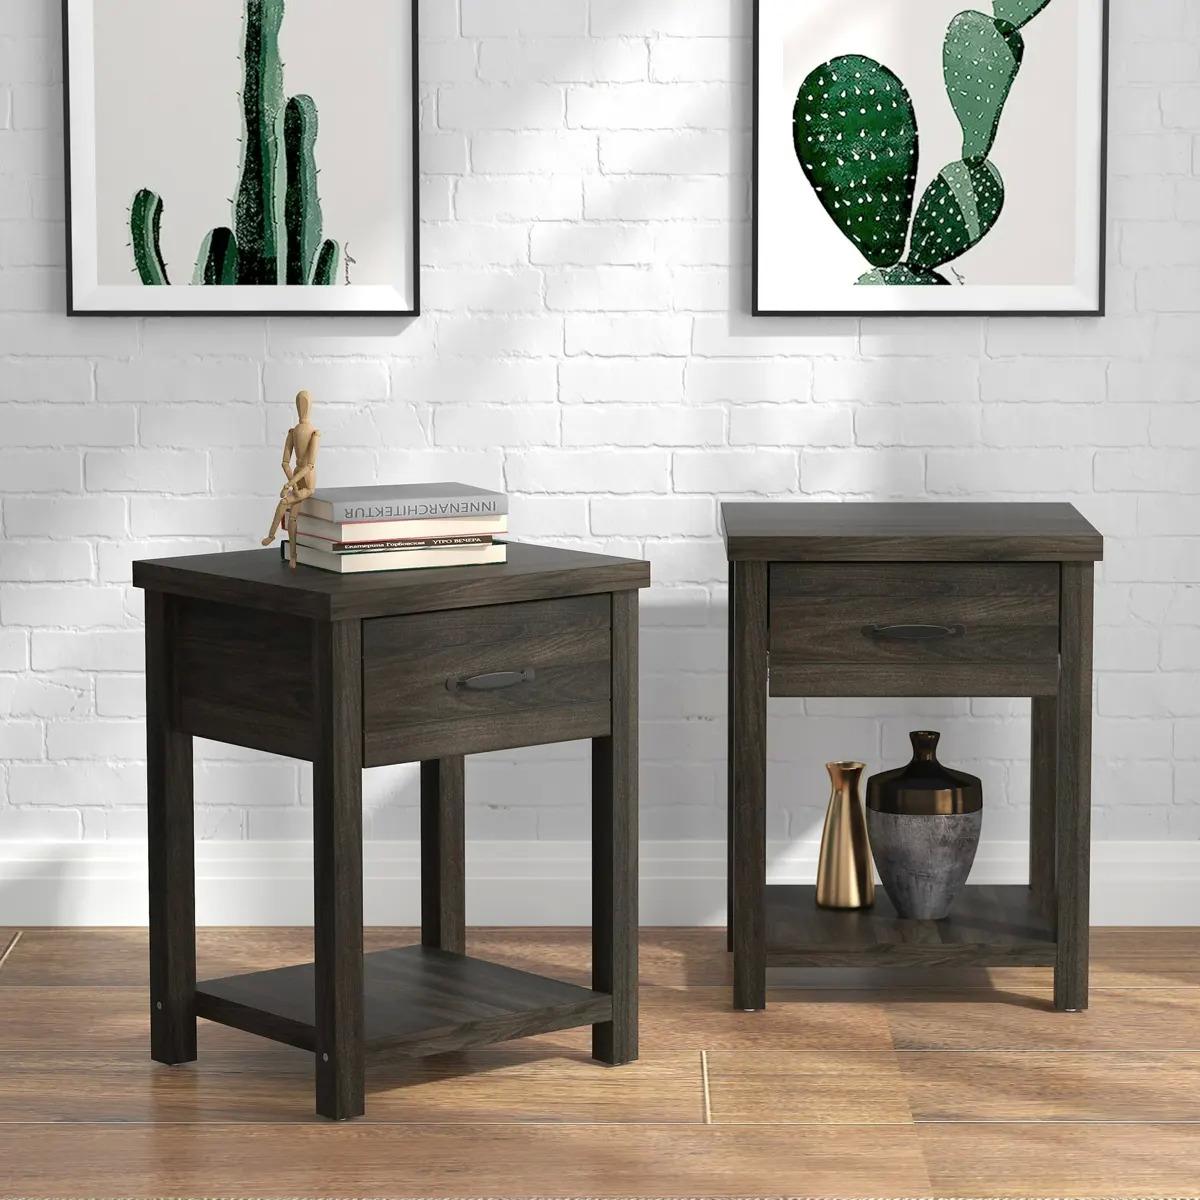 Hillsdale Lancaster Farmhouse One-Drawer Nightstands 2 Pack for $88 Shipped